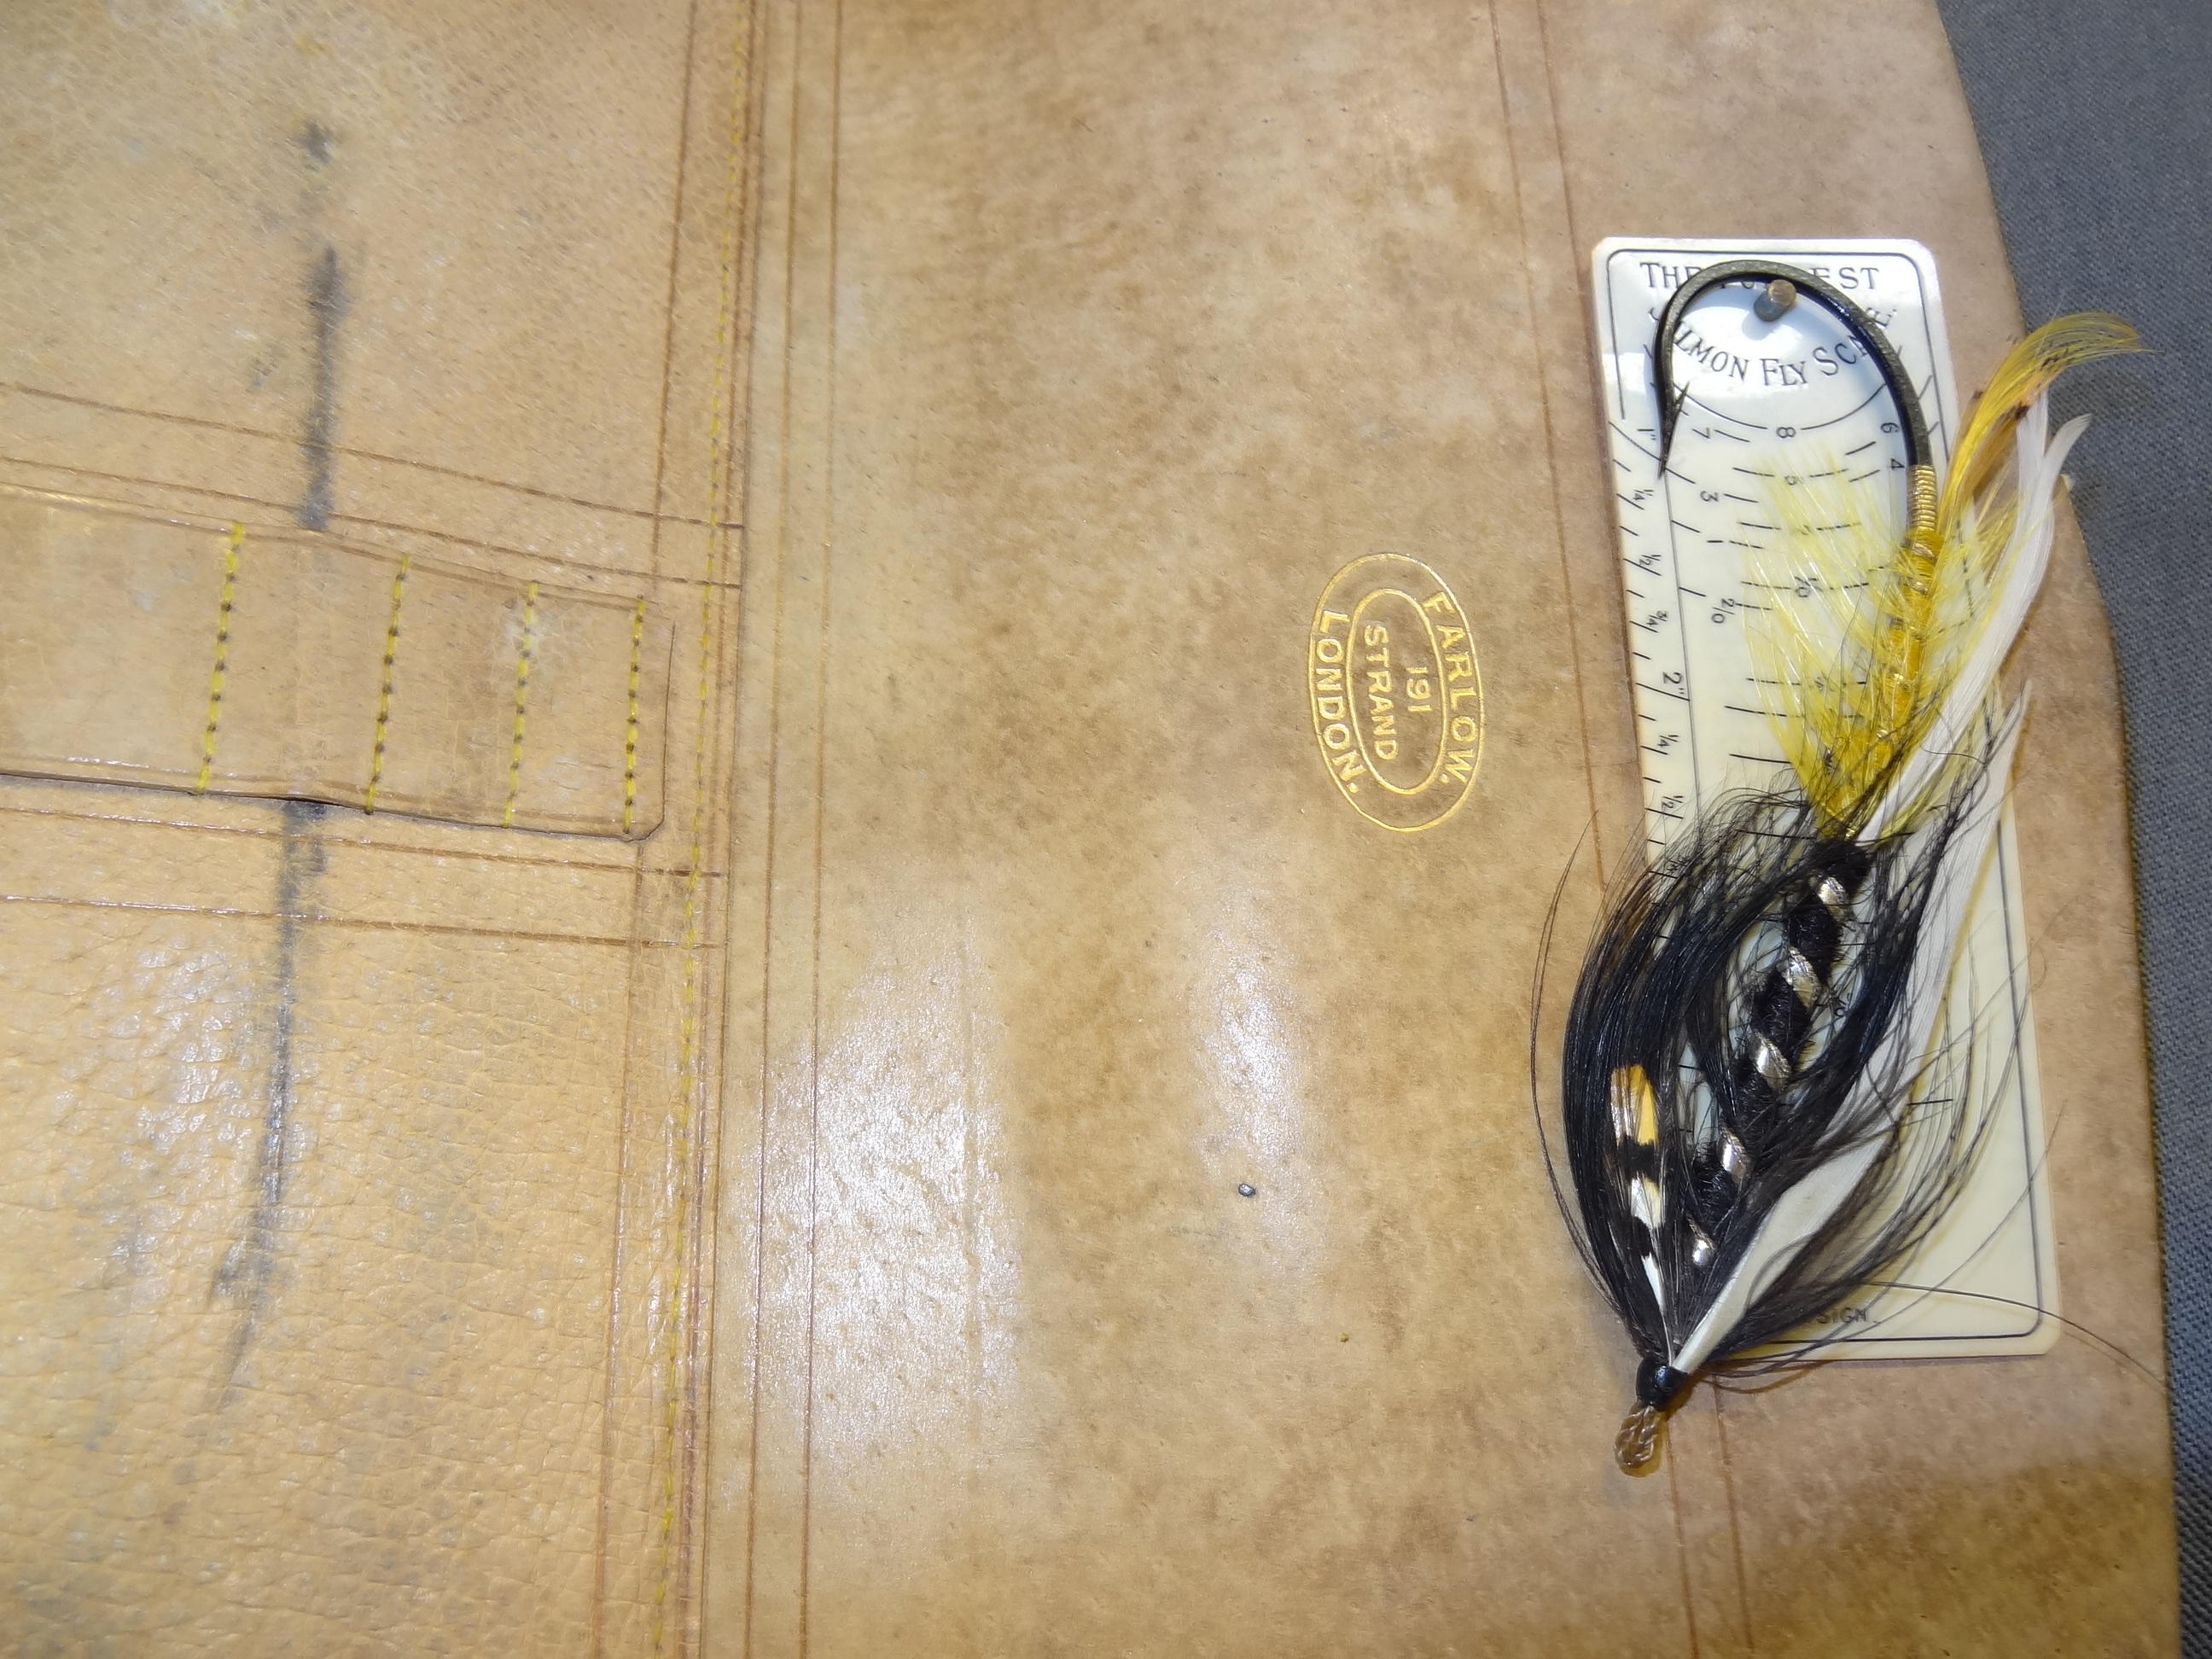 Farlows Leather Fly Wallet